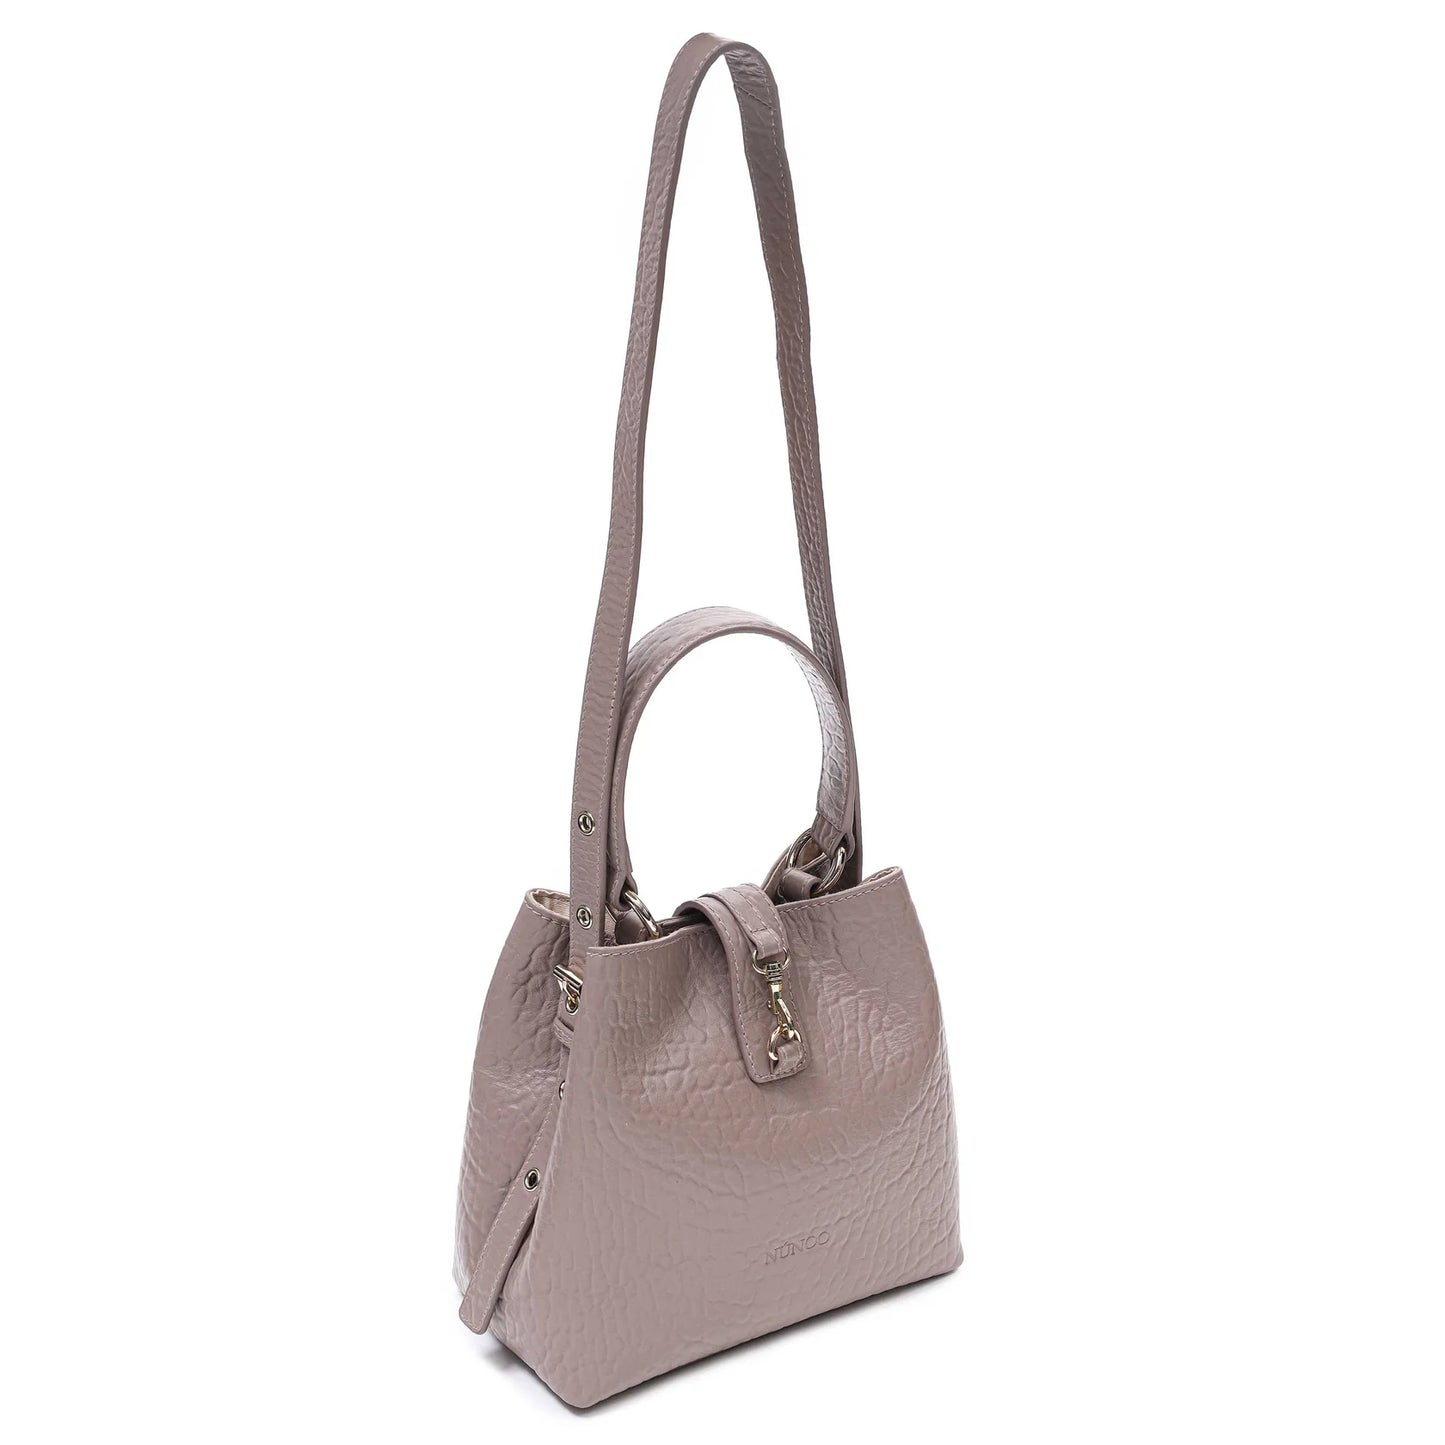 NUNOO | SHOULDER BAGS MUJER | SMALL CHIARA NEW ZEALAND TAUPE W. GOLD | GRIS